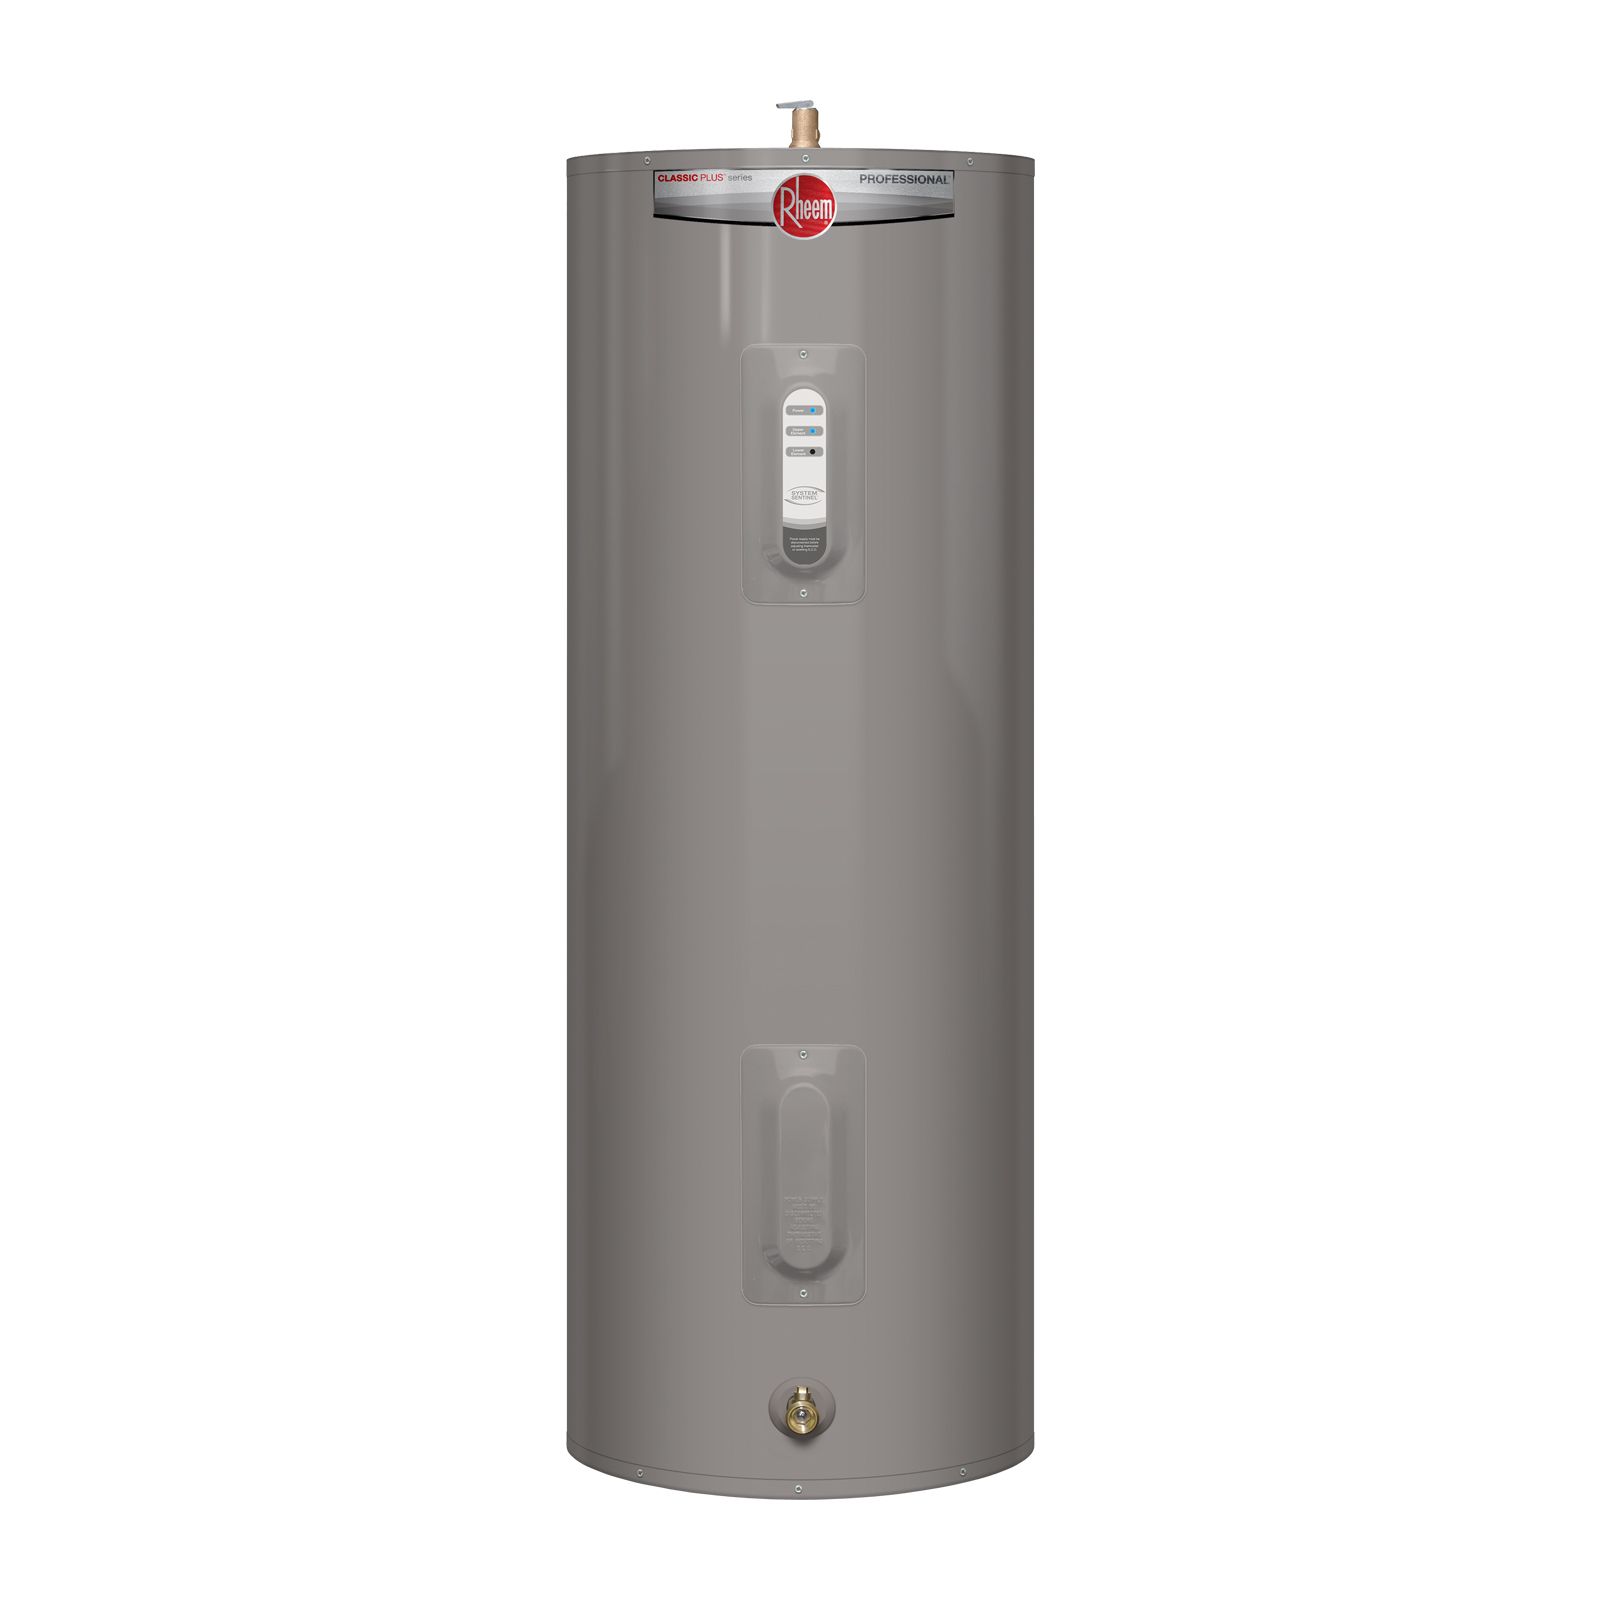 how to add hot water heater to dredge